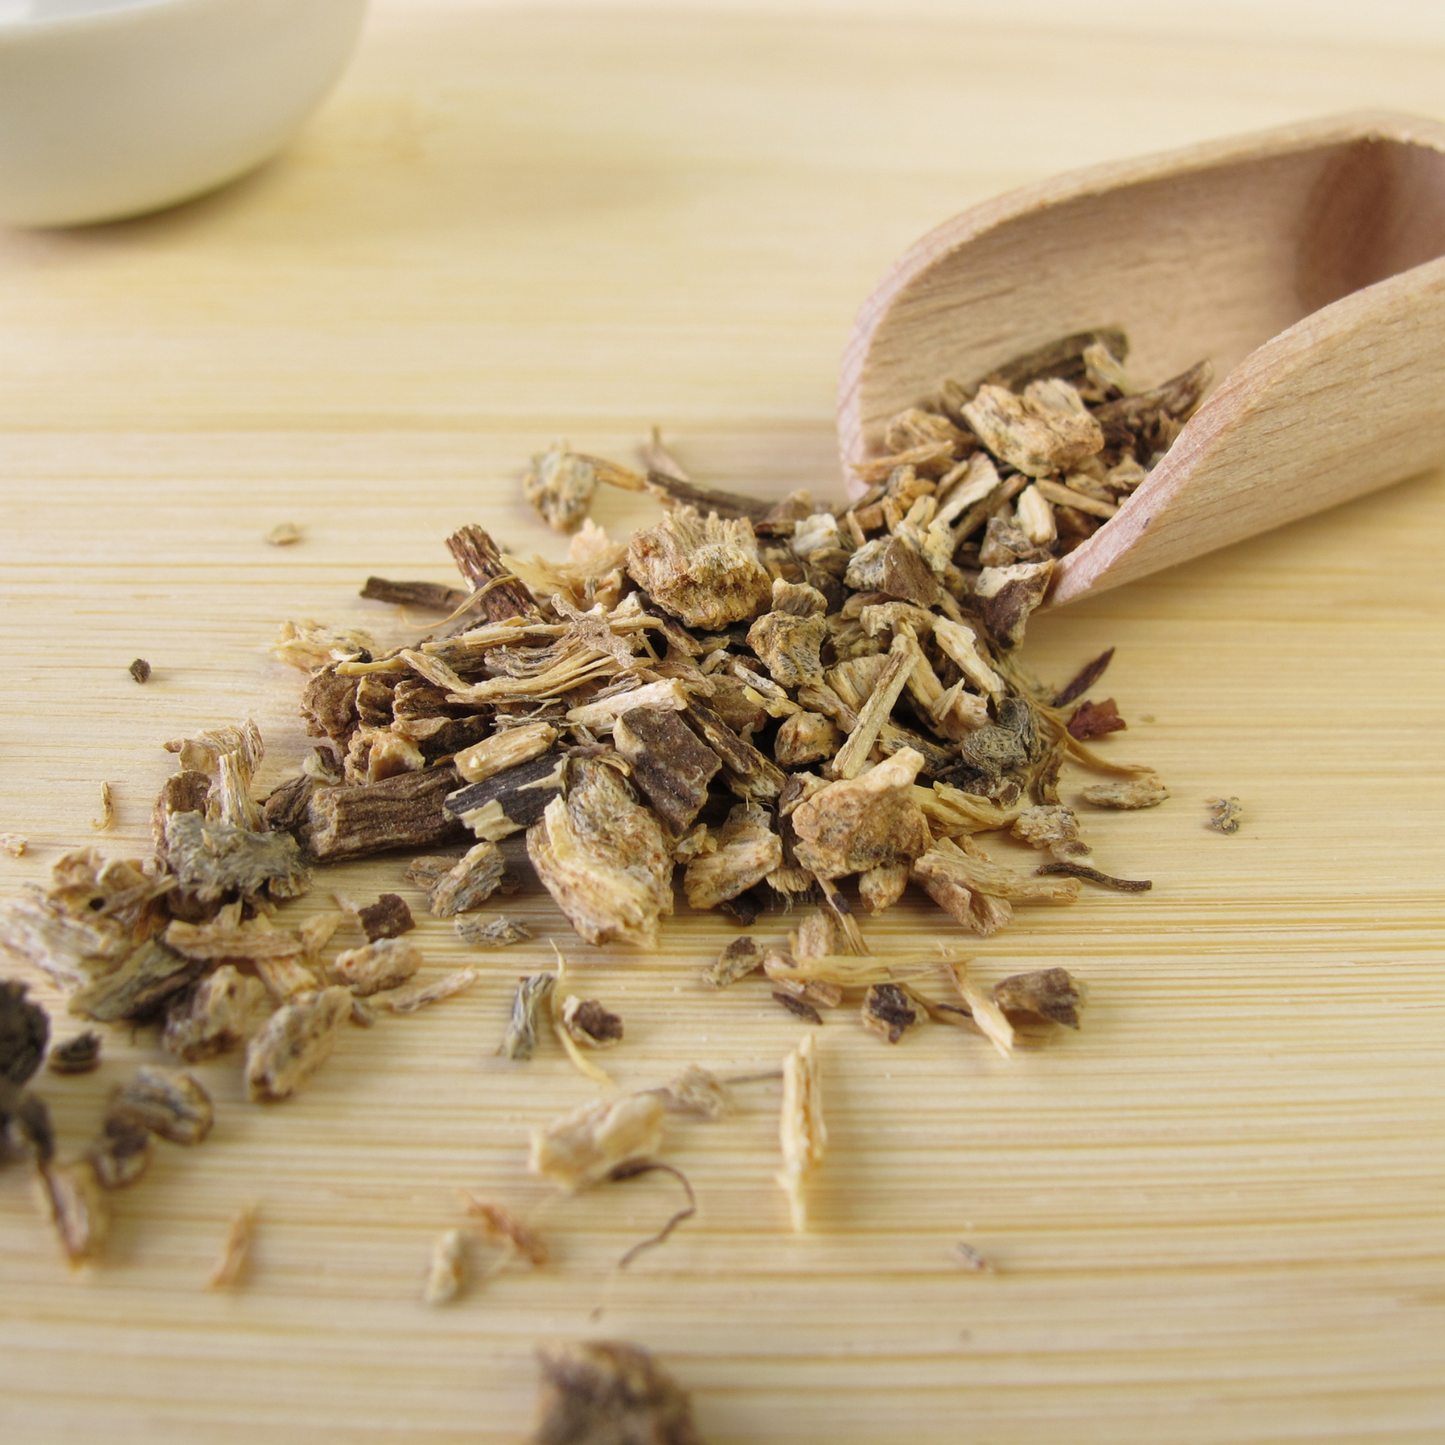 Witchy Pooh's Ashwagandha Root For Your Inner Powerhouse